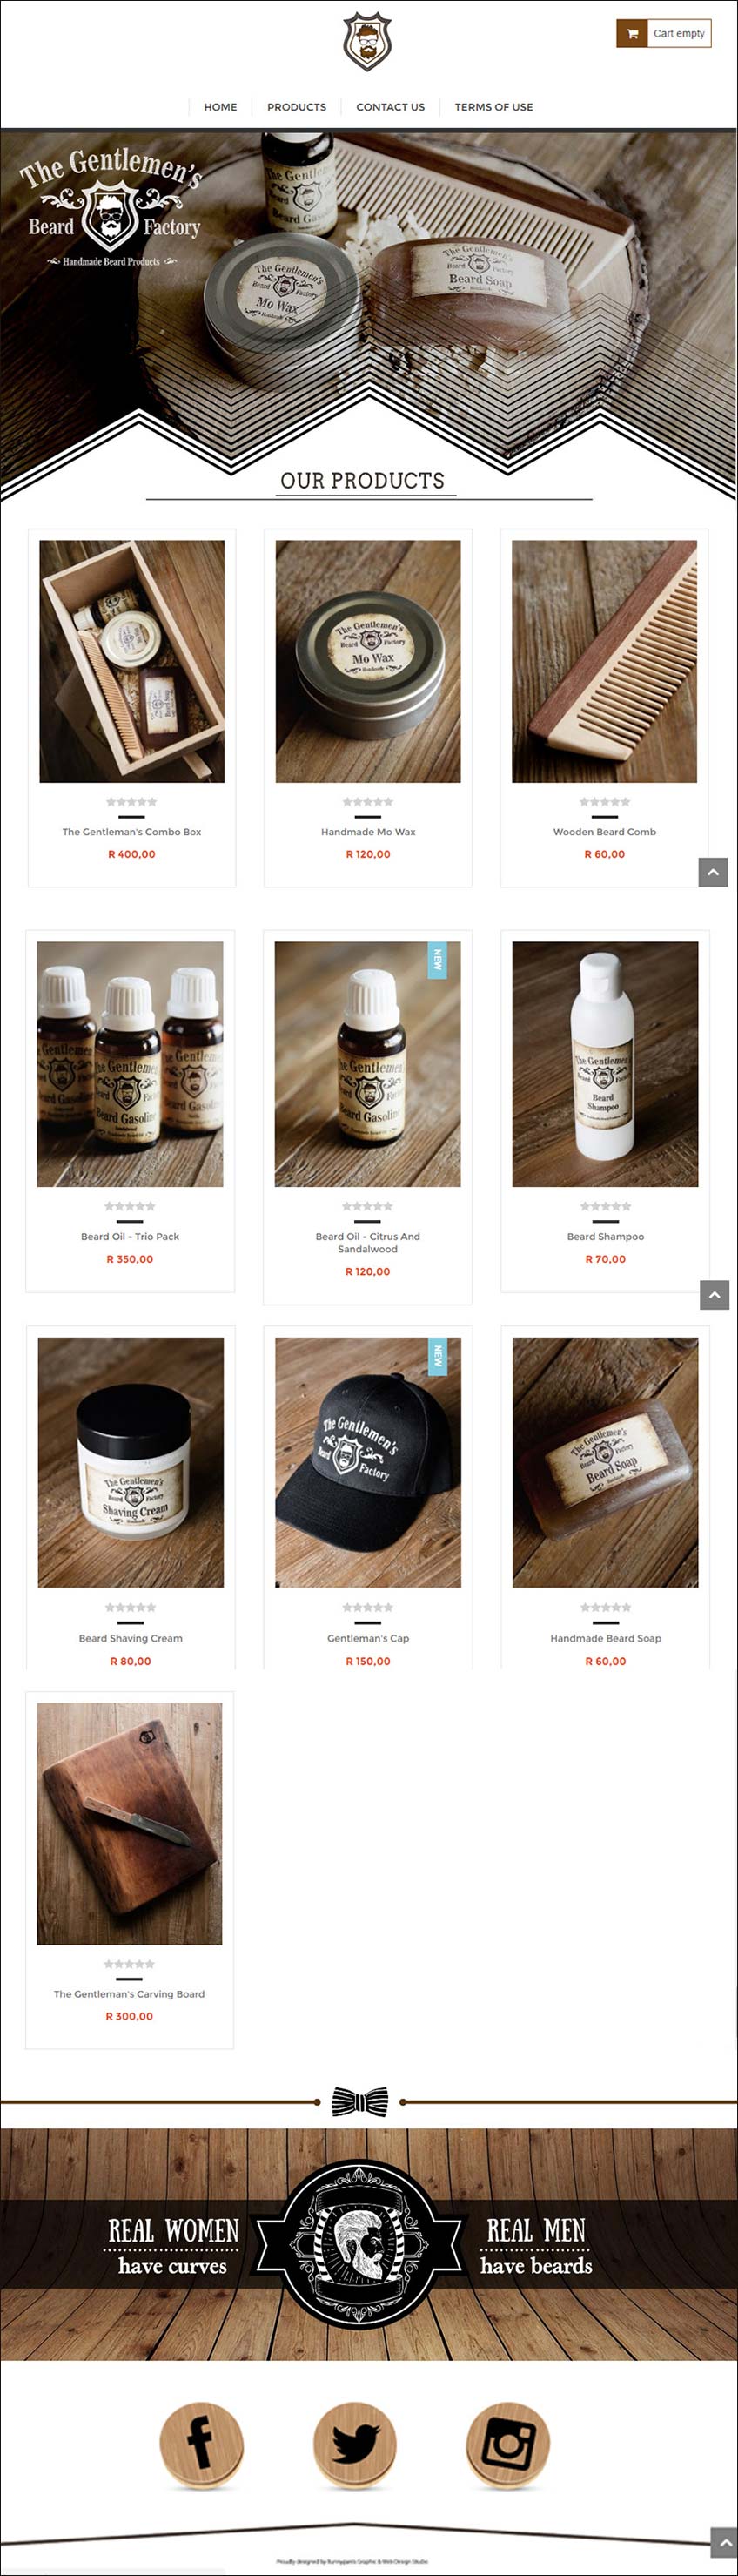 gentlemans beard factory product page small jpeg